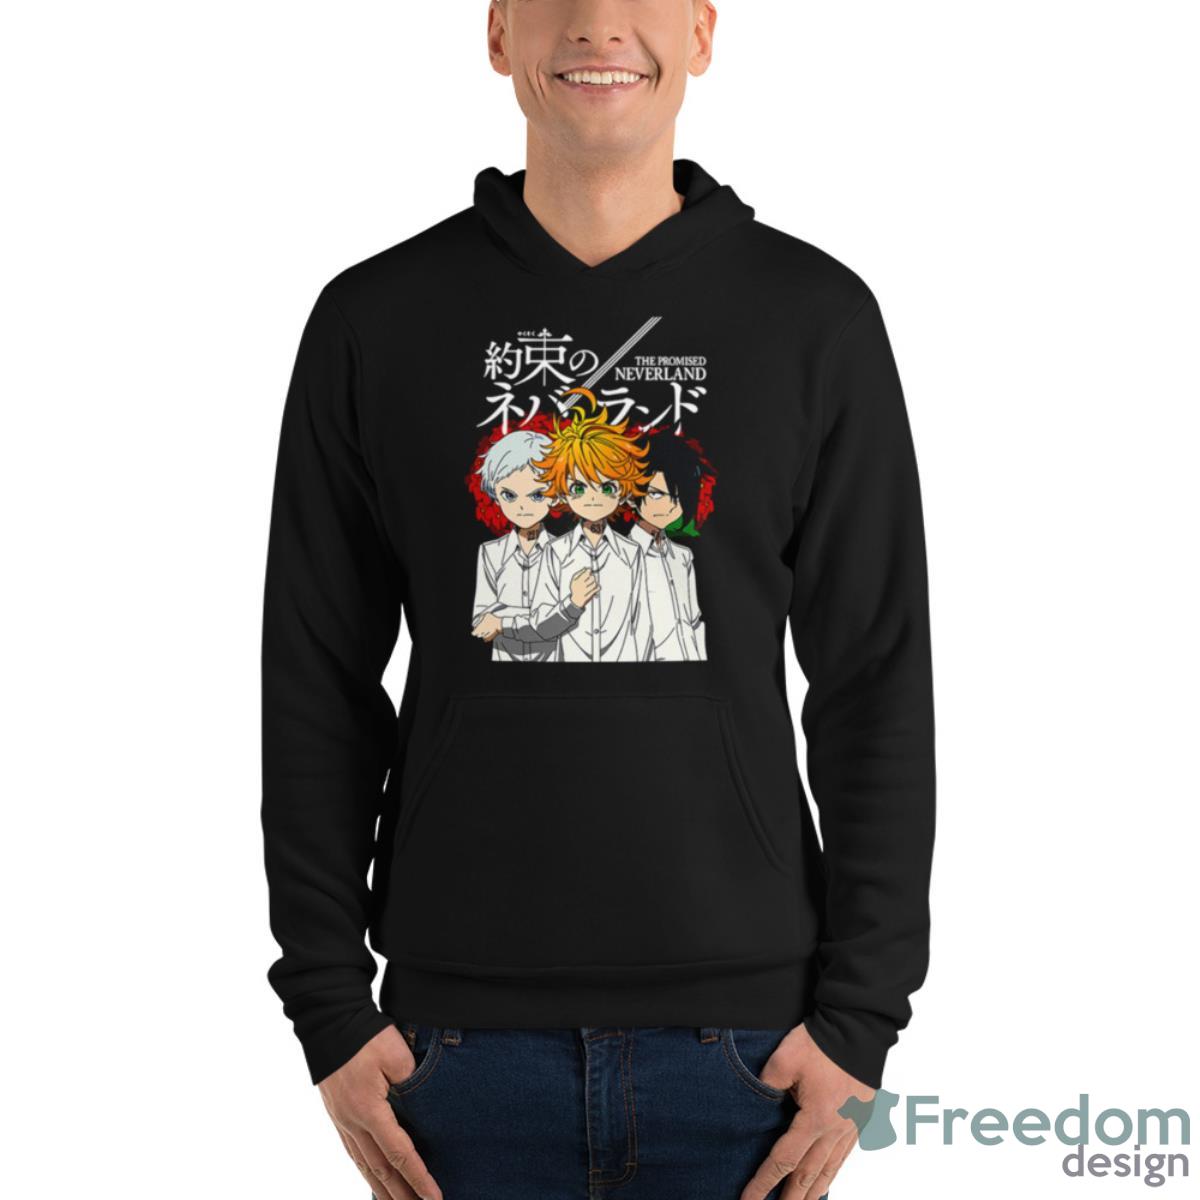 The Brightest Kids The Promised Neverland shirt